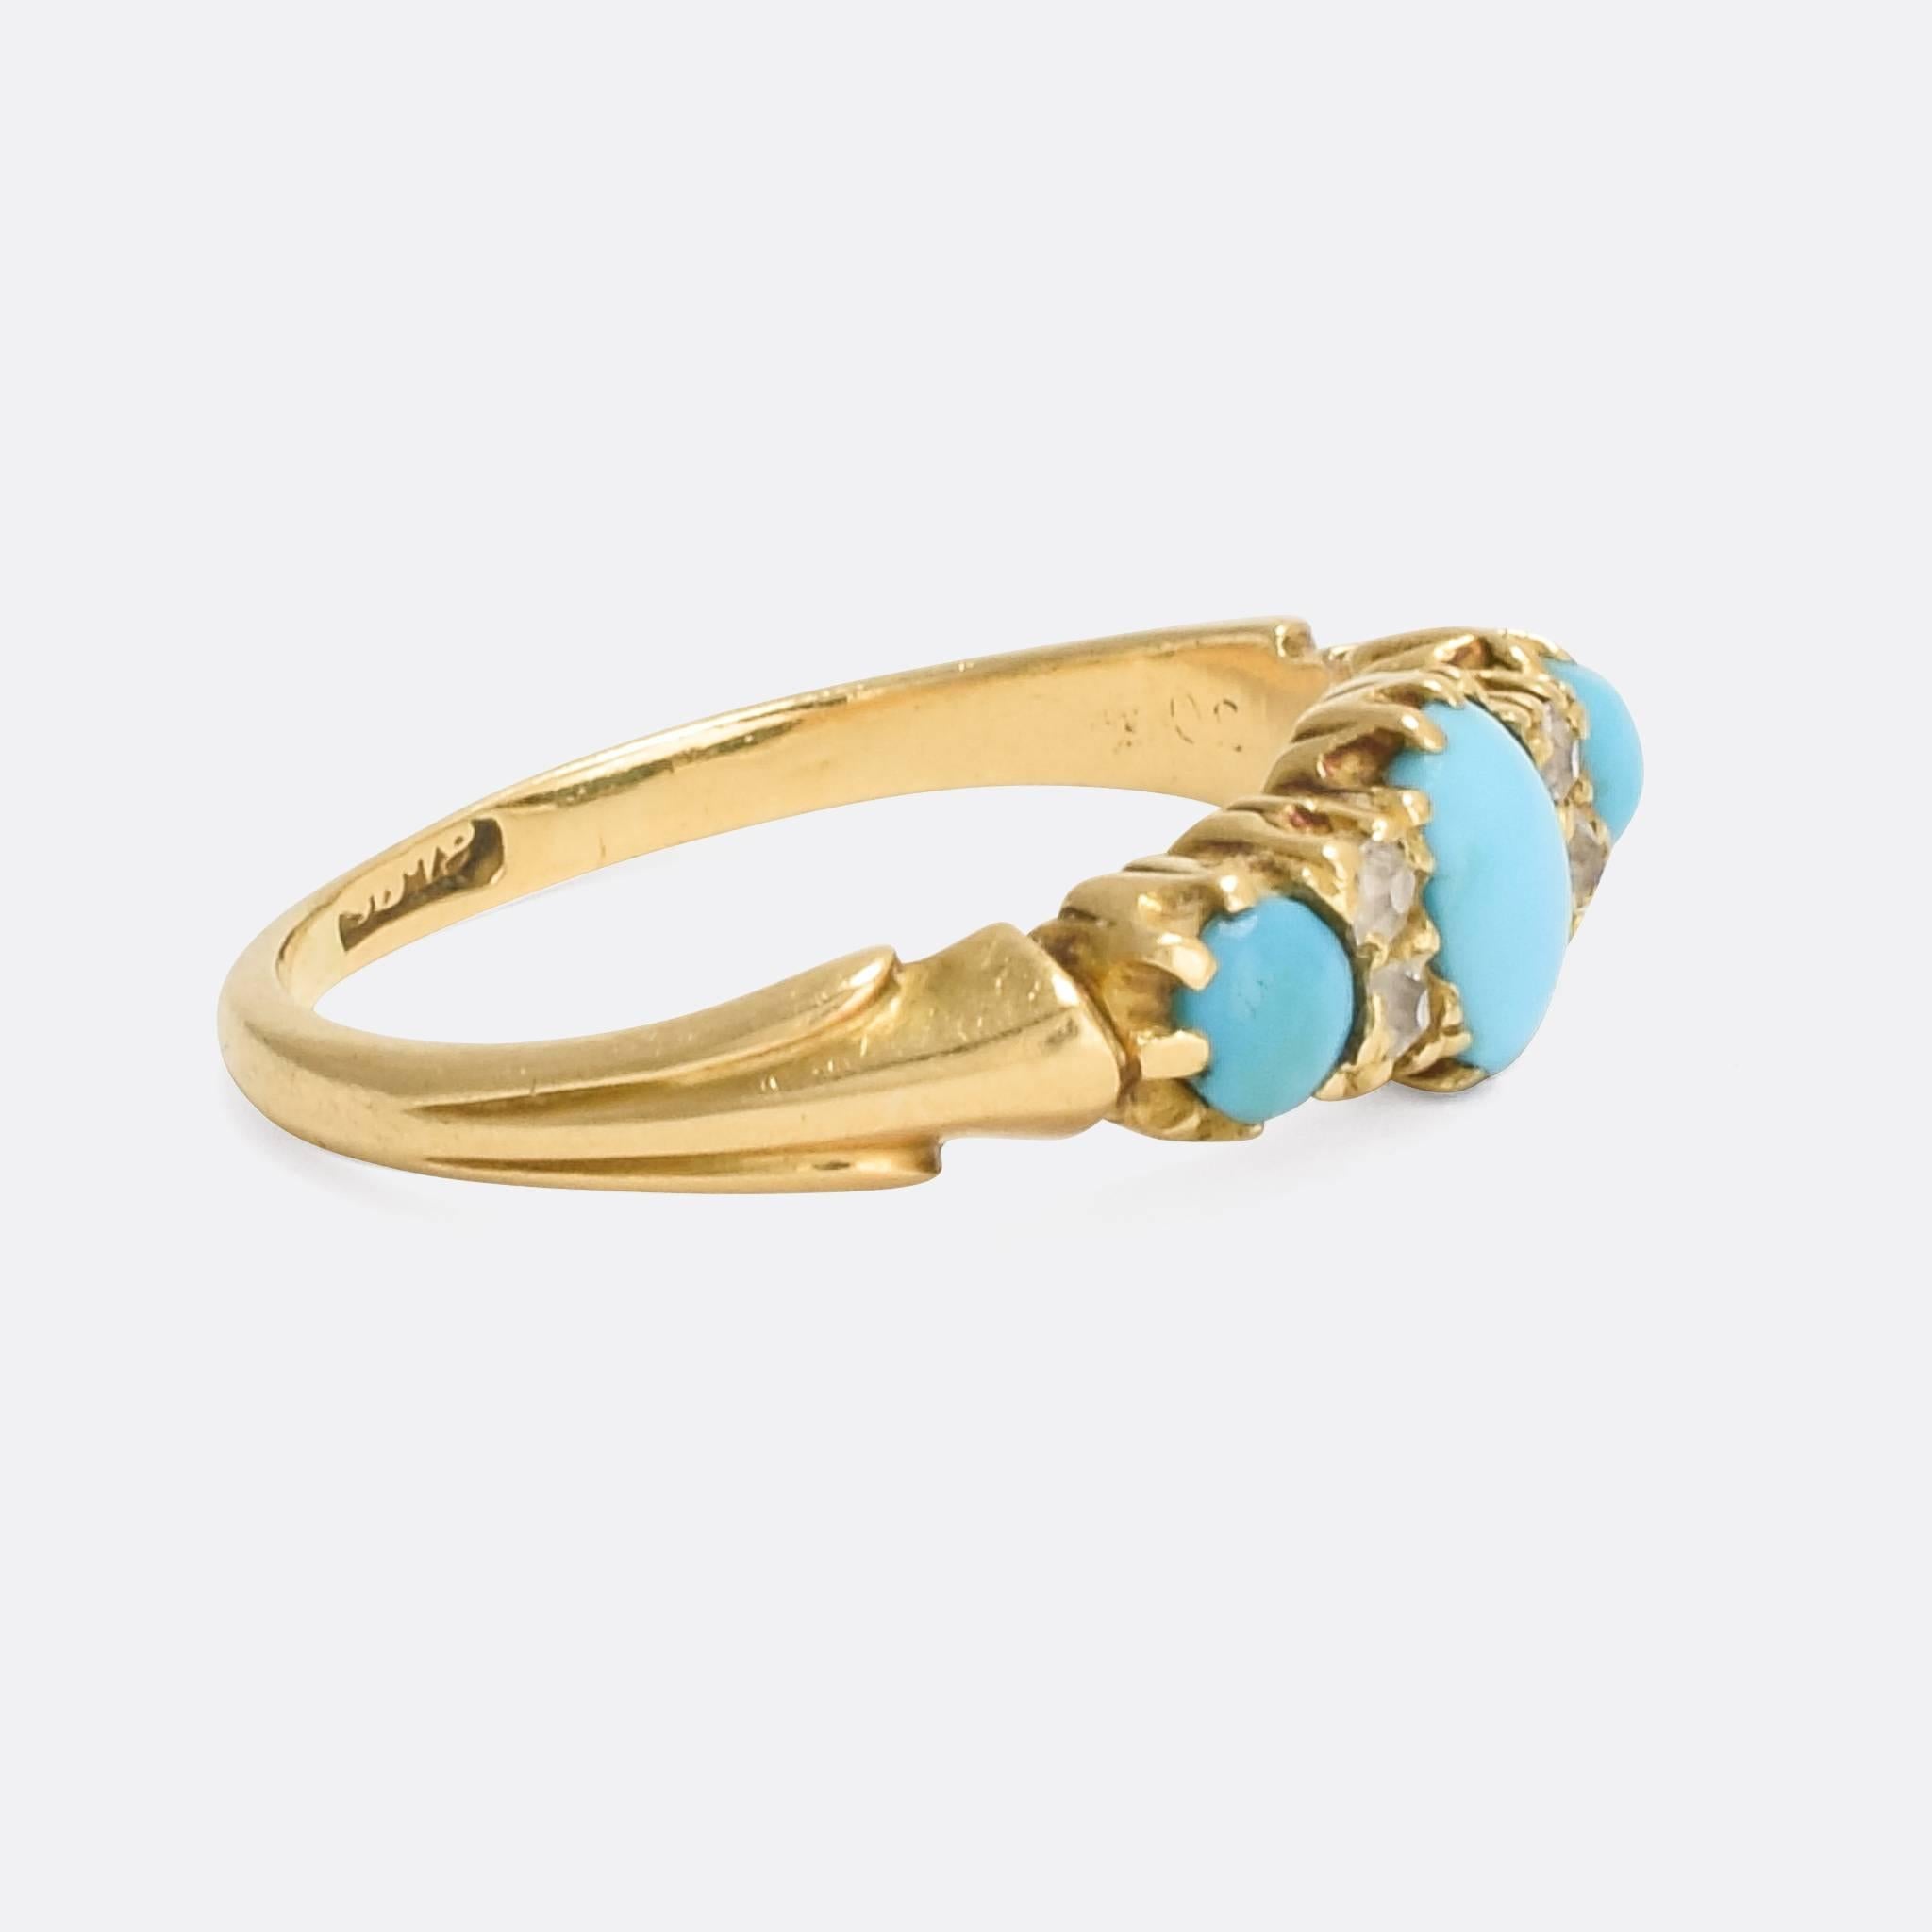 A sweet Victorian Diamond & Turquoise stacking ring in 18ct gold. Dating to the late 1890's. Stylistically very typical of the period. 

STONES 
Old Cut Diamonds, Turquoise

RING SIZE
5 US

MEASUREMENTS 
Width of Head: 5.8mm
Length of head: